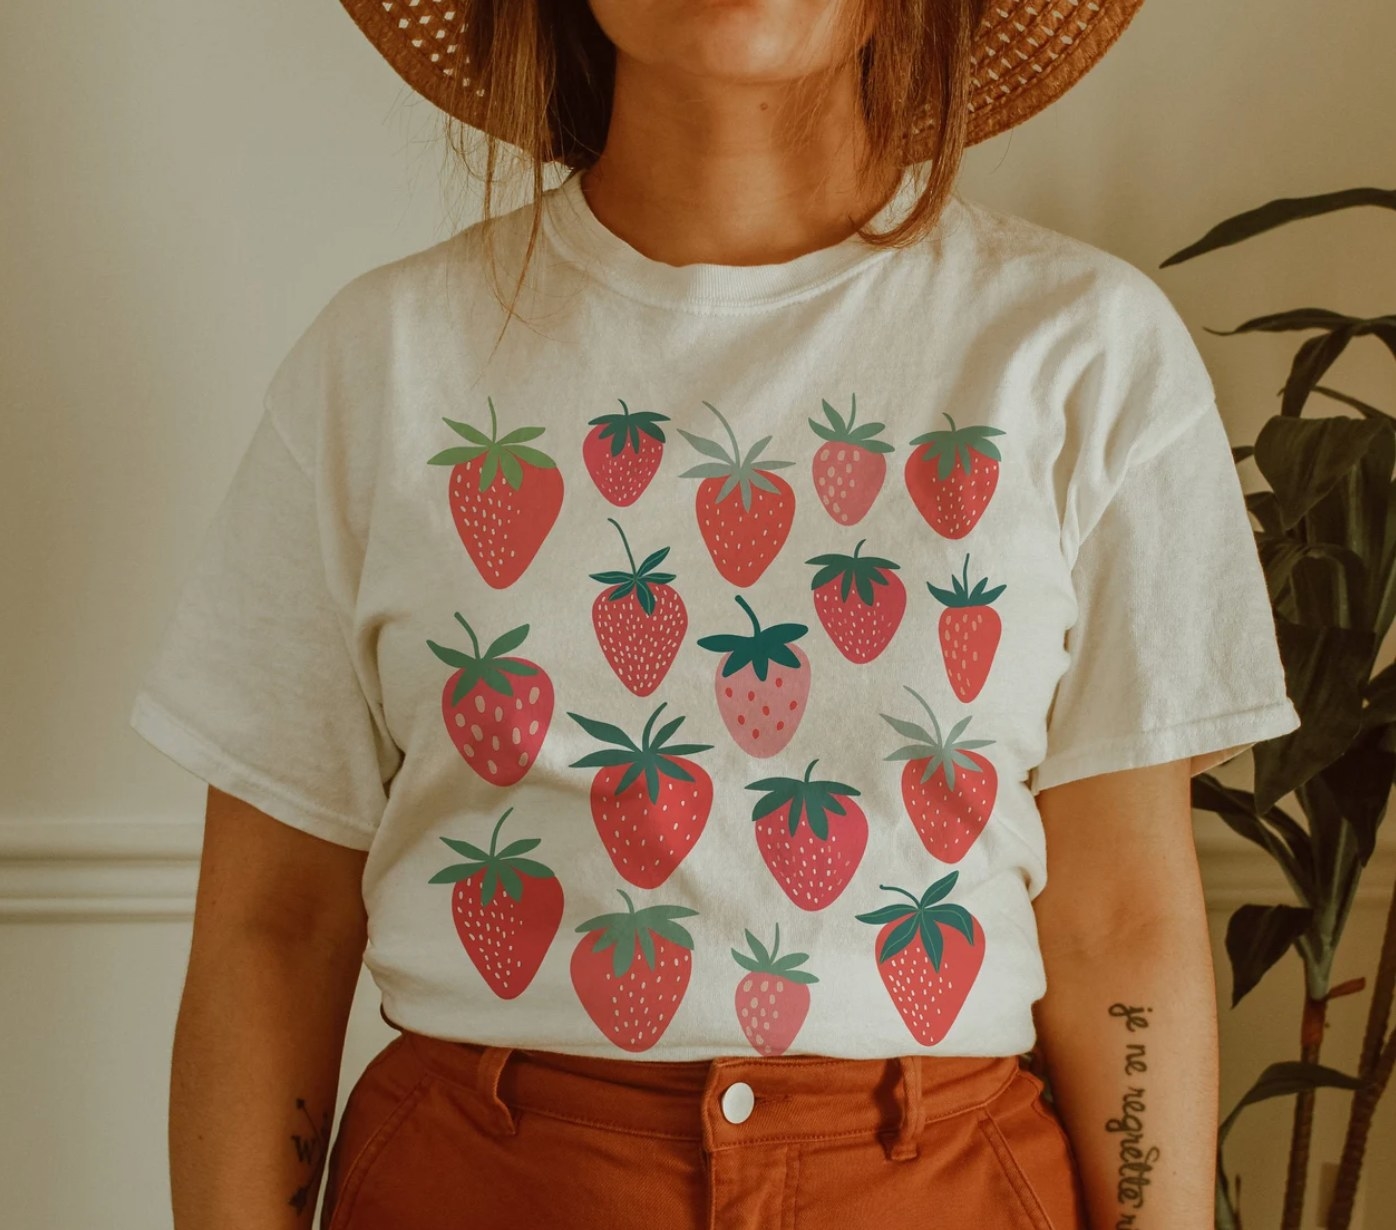 Model is wearing a white tee that has multiple strawberries printed on the front